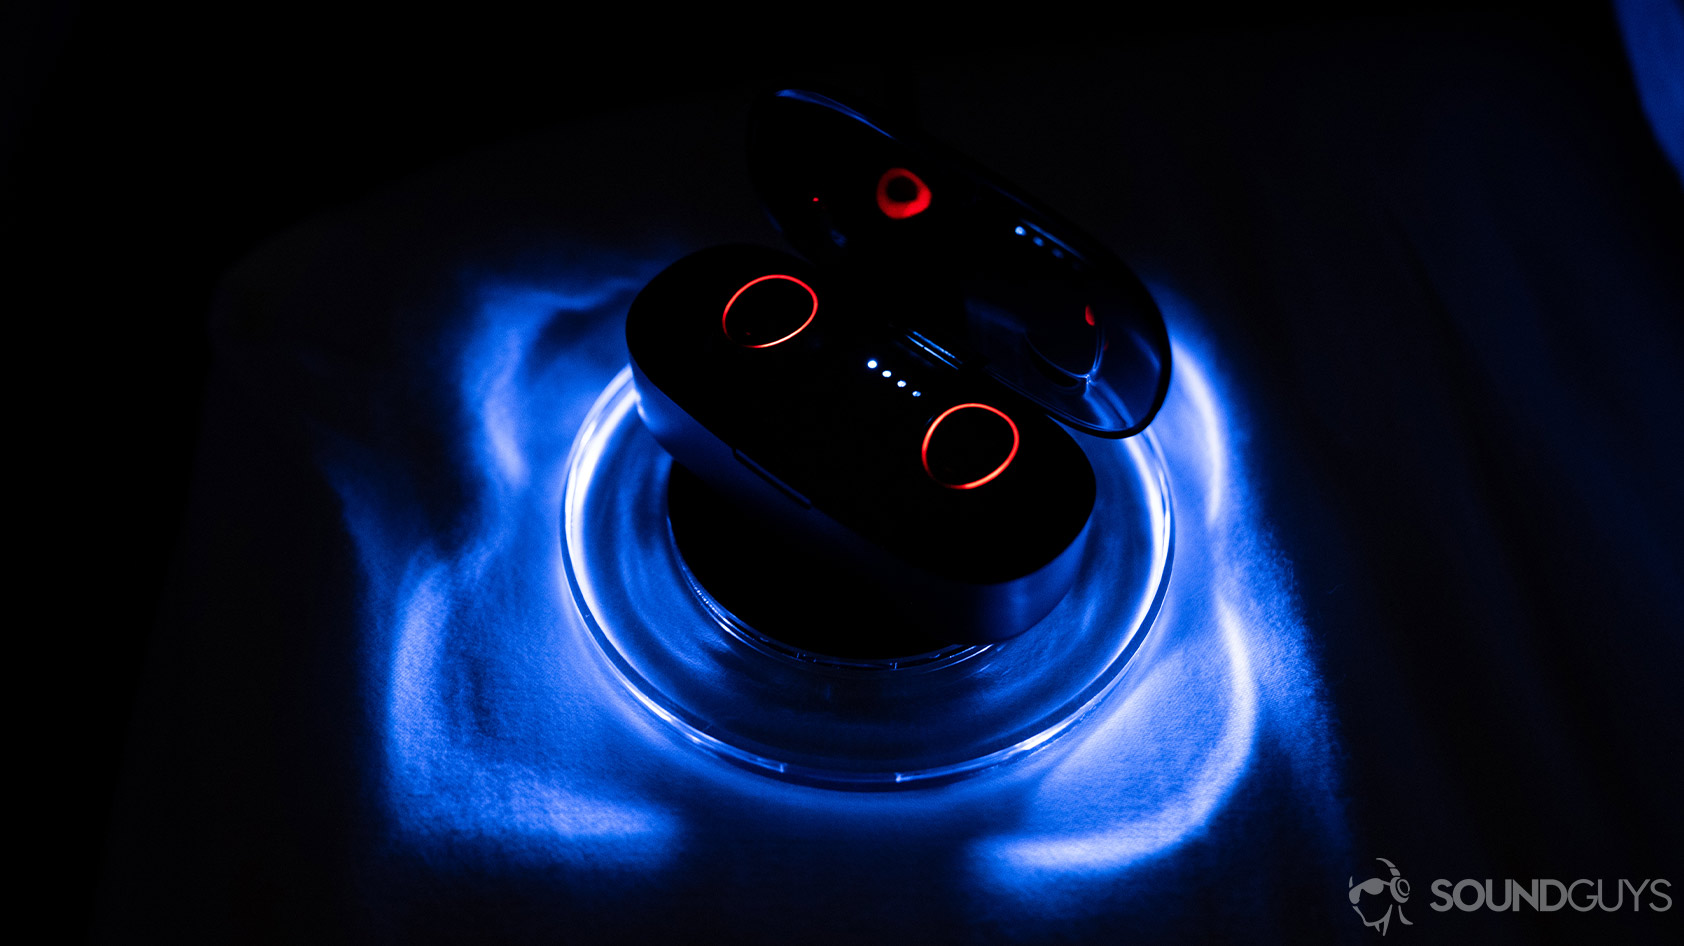 A picture of the Klipsch S1 True Wireless earbuds in the charging case on the included wireless charging pad that glows blue when active.